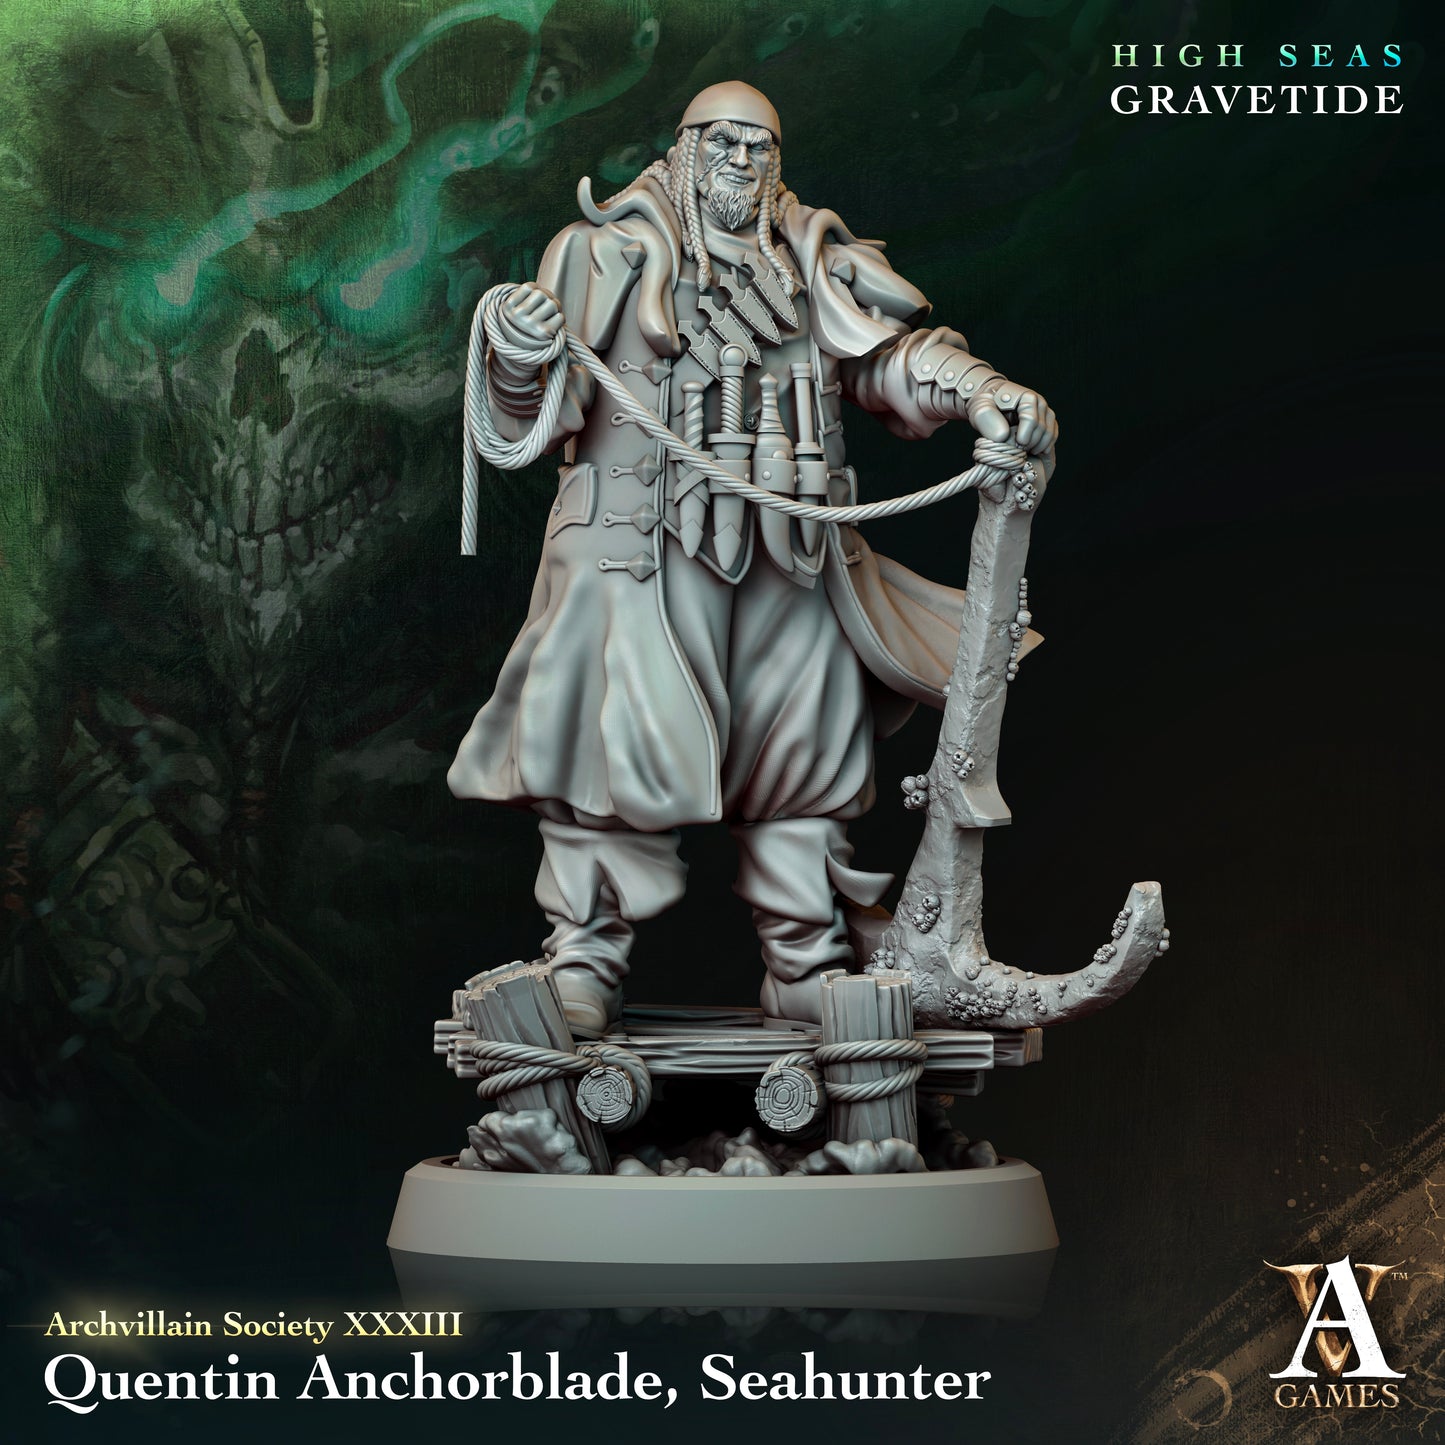 Quentin Anchorblade – Seahunter